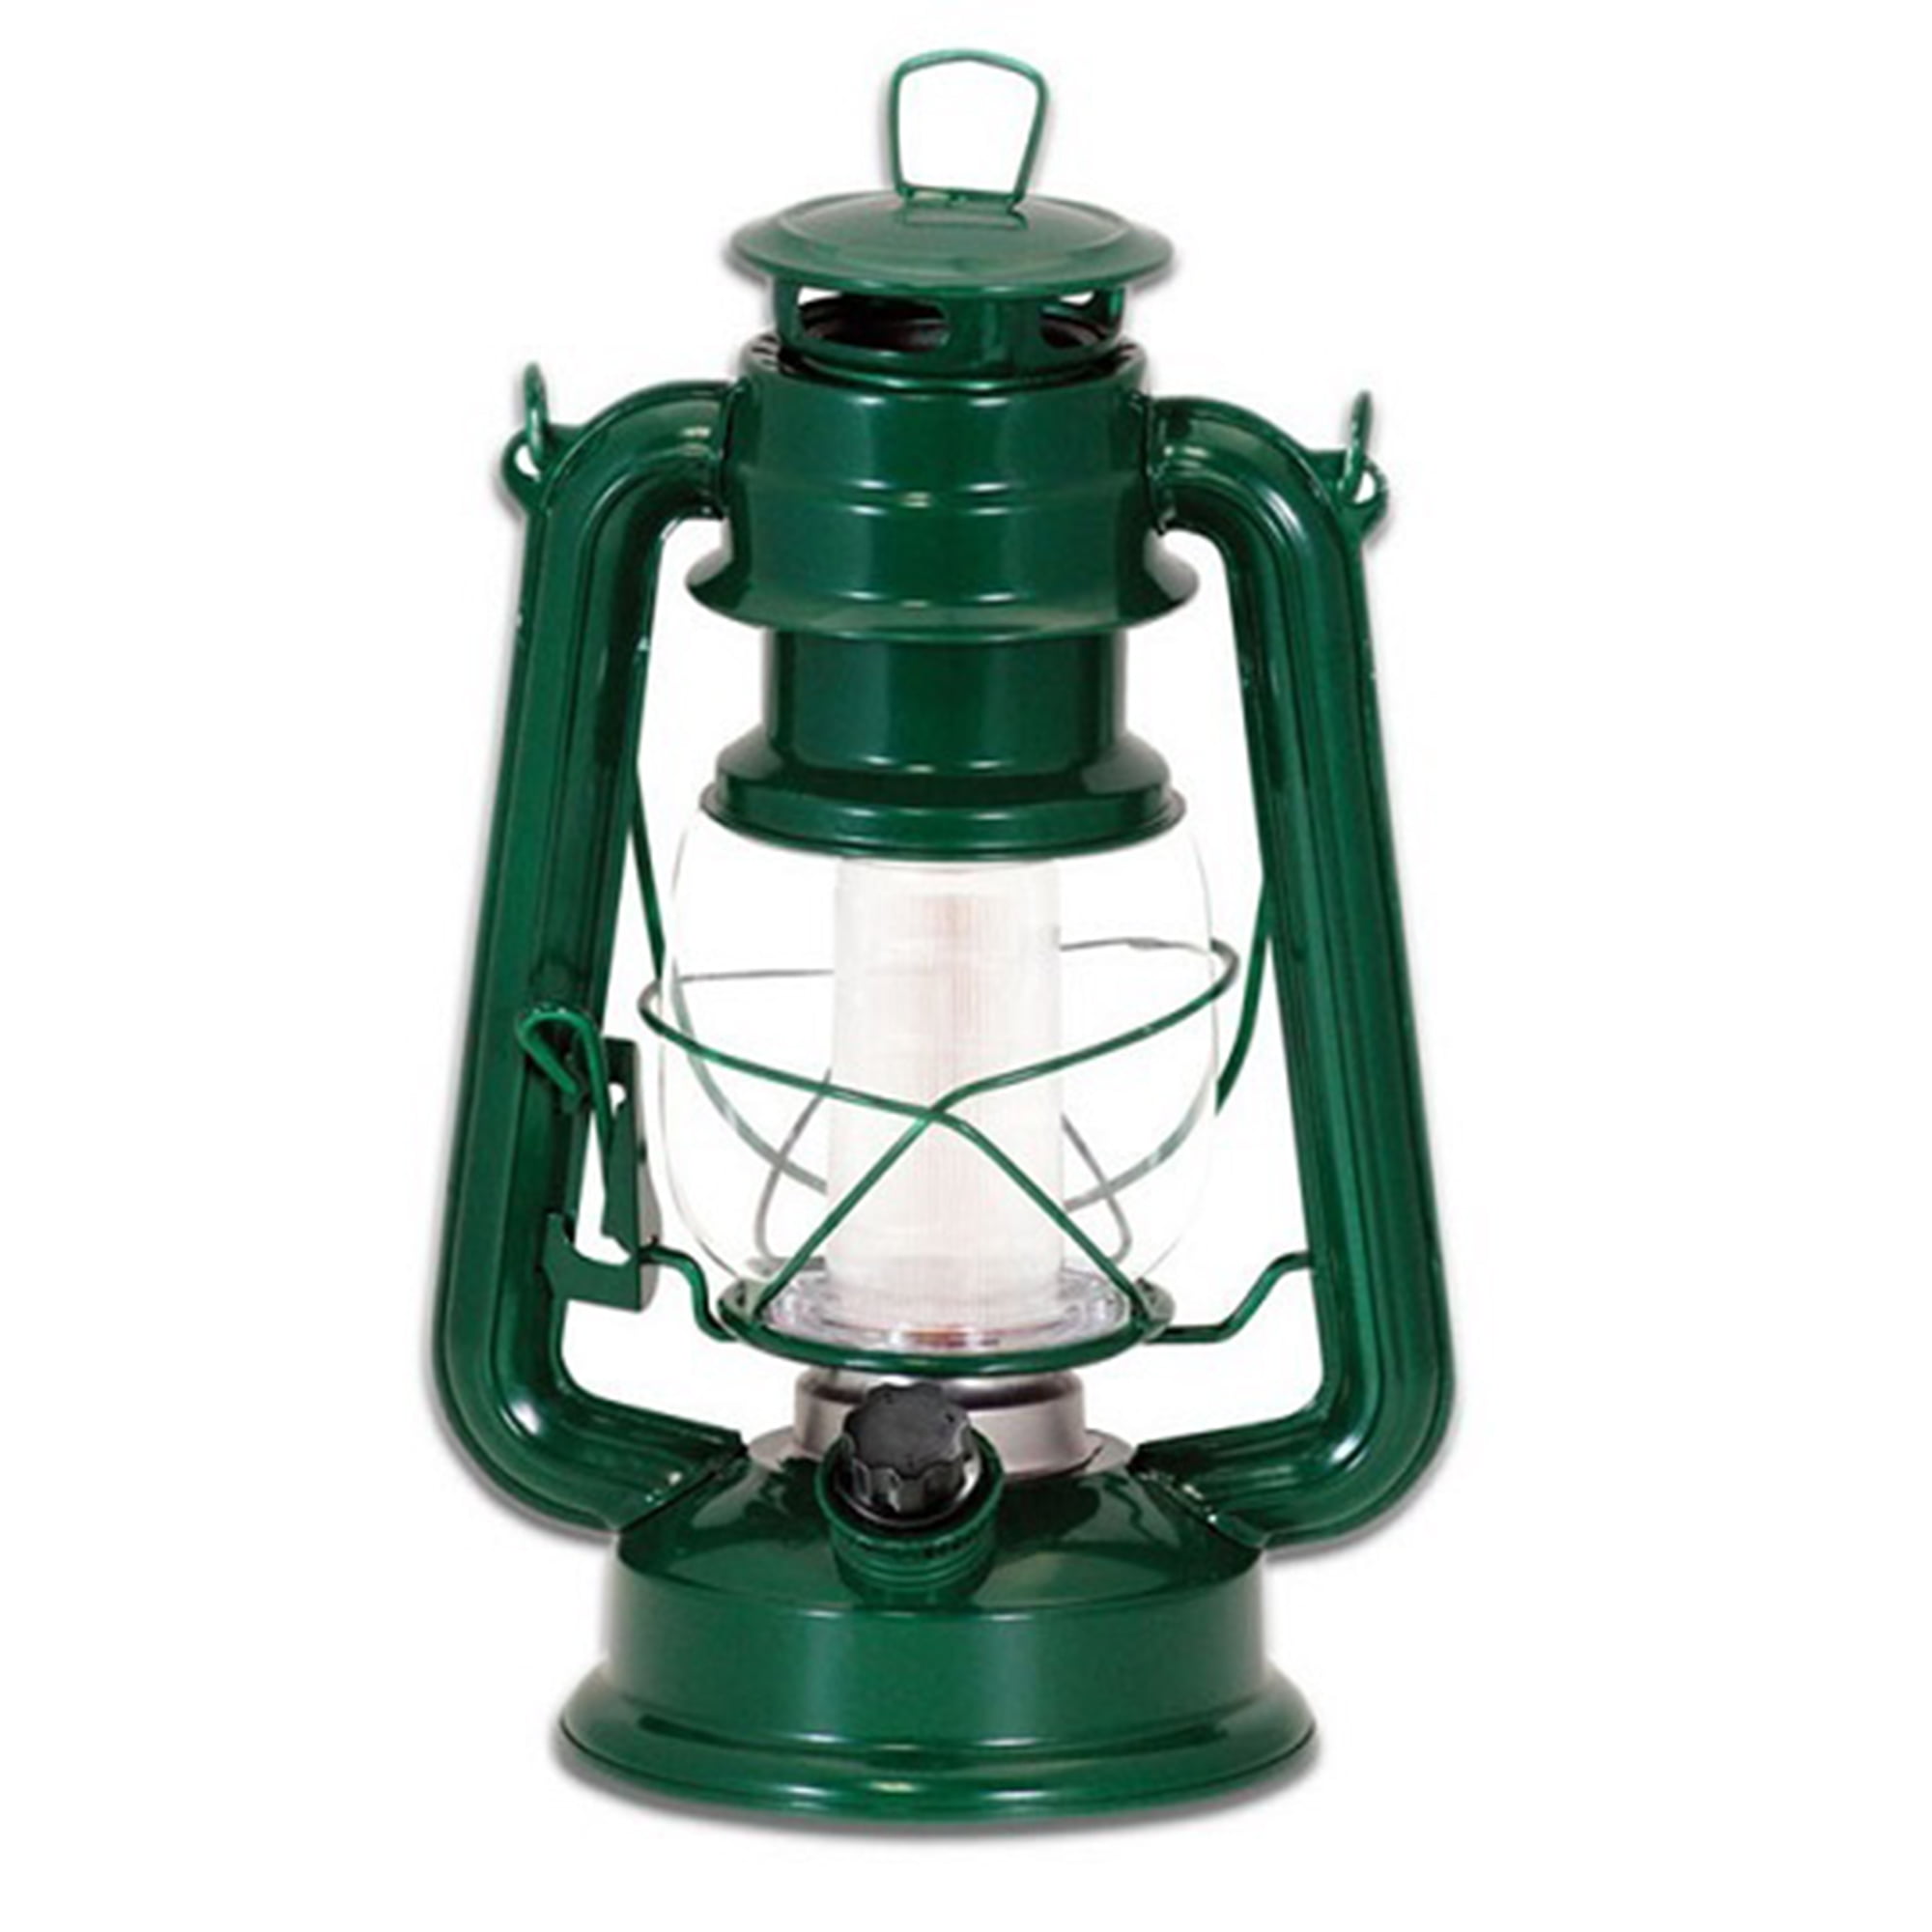 LIT-PaTH LED Camping Lantern, Rechargeable Light with Magnet Base